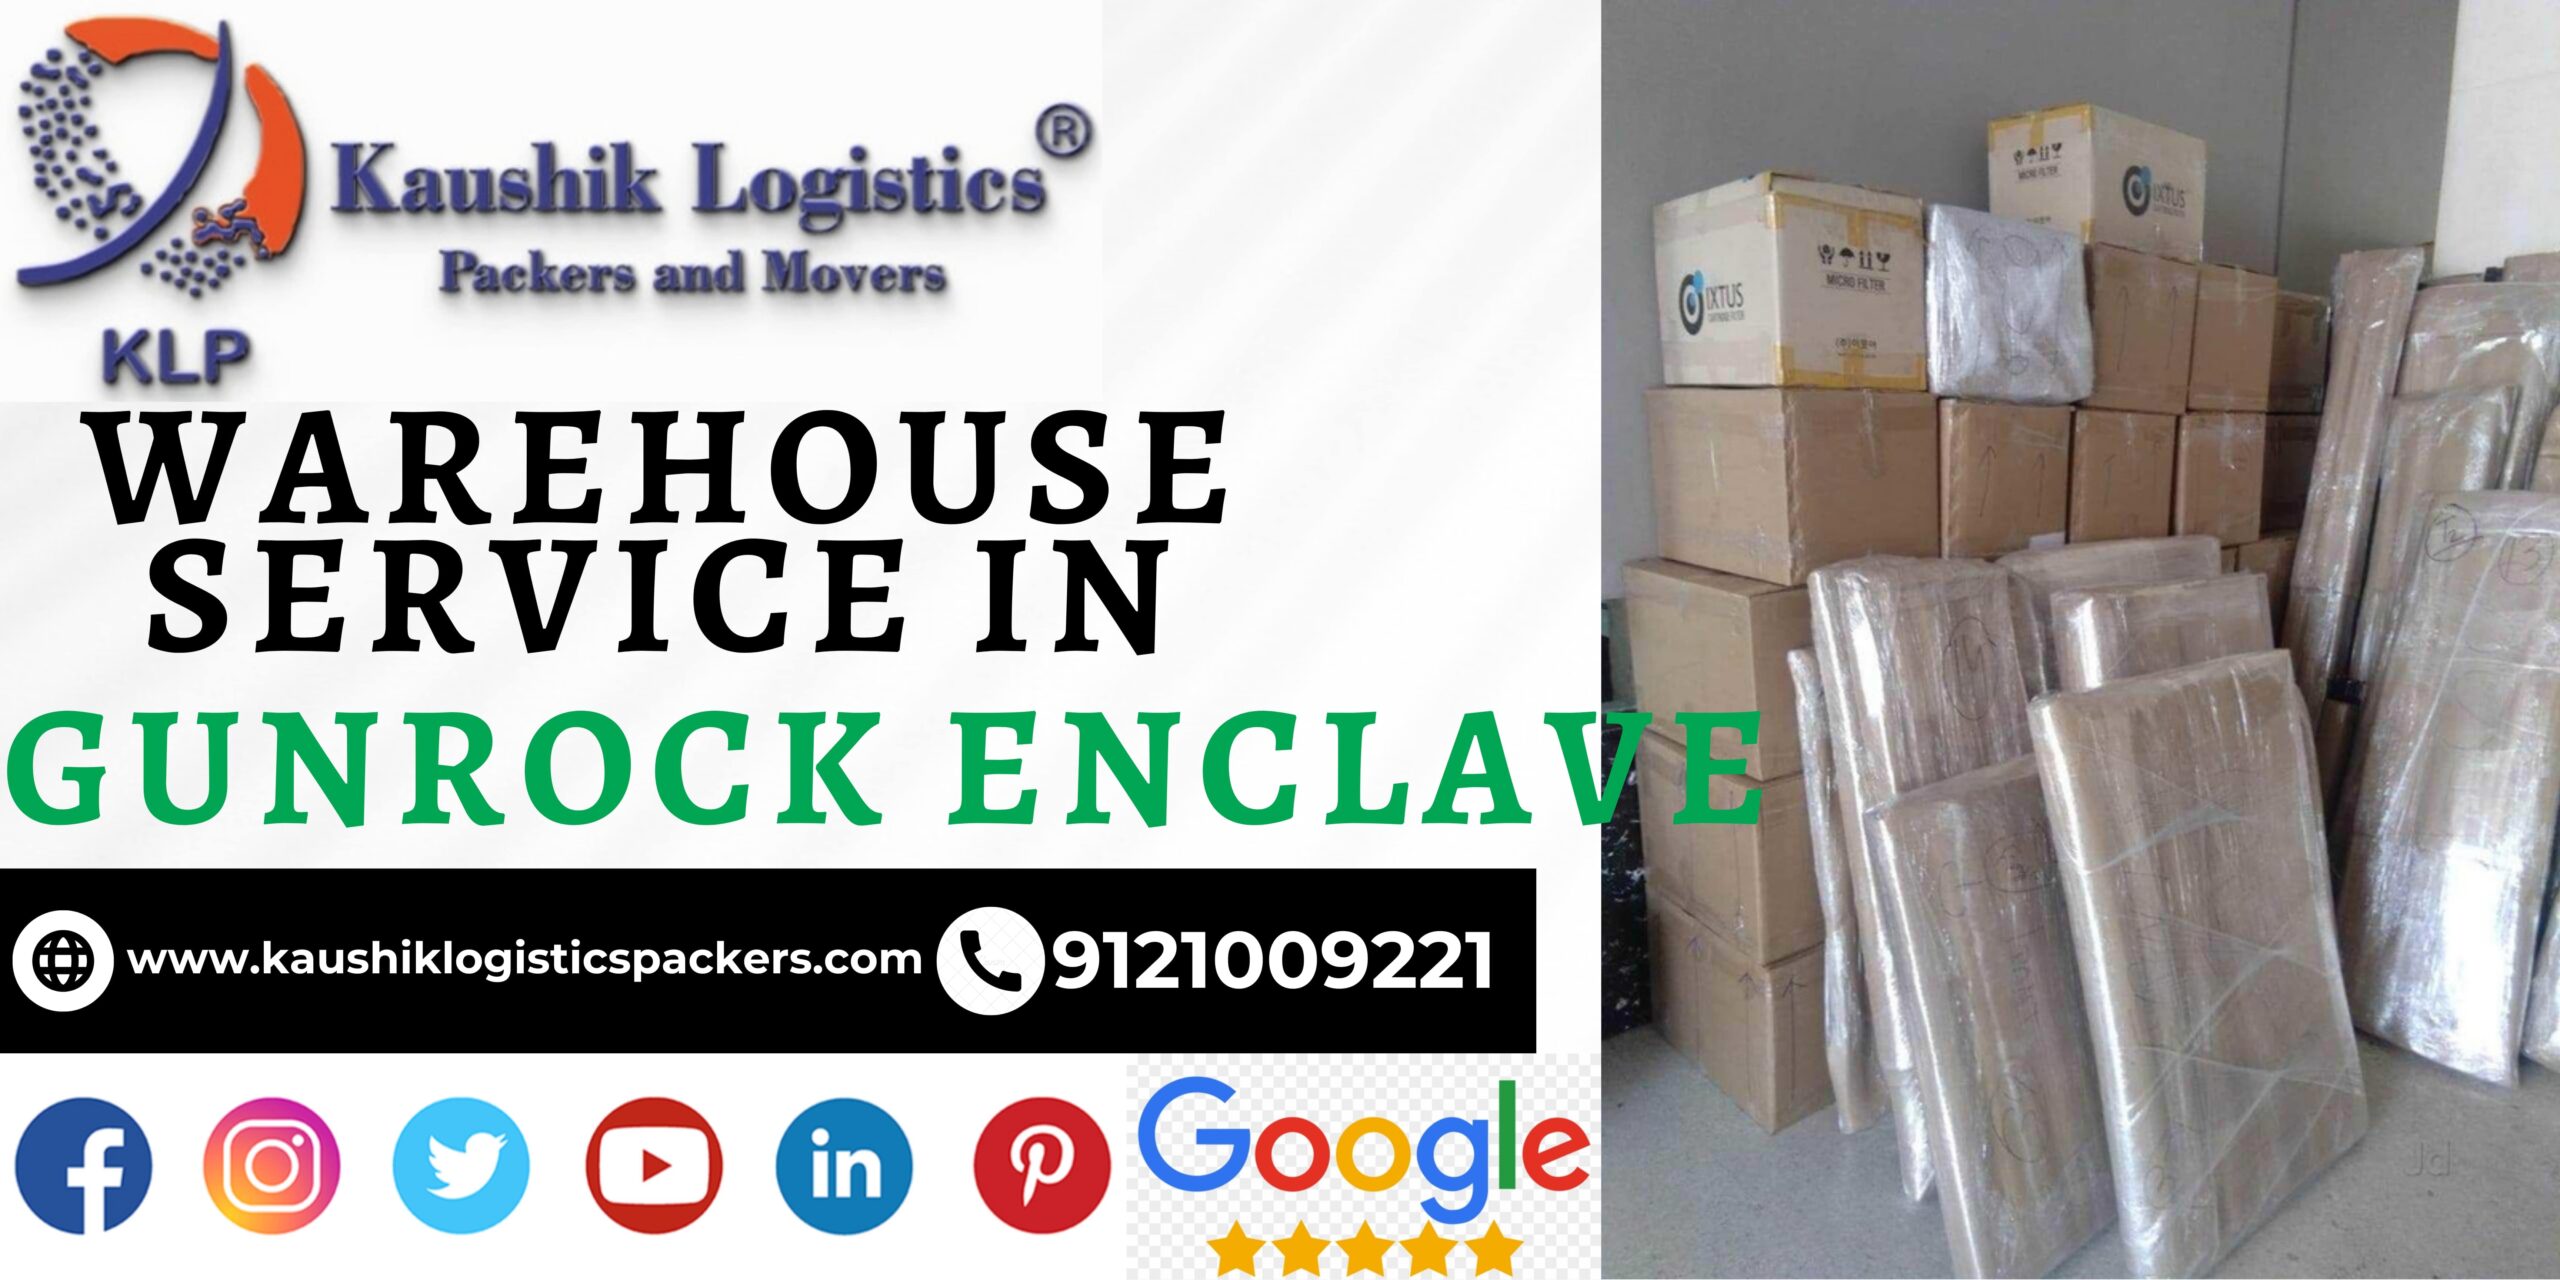 Packers and Movers In Gunrock Enclave